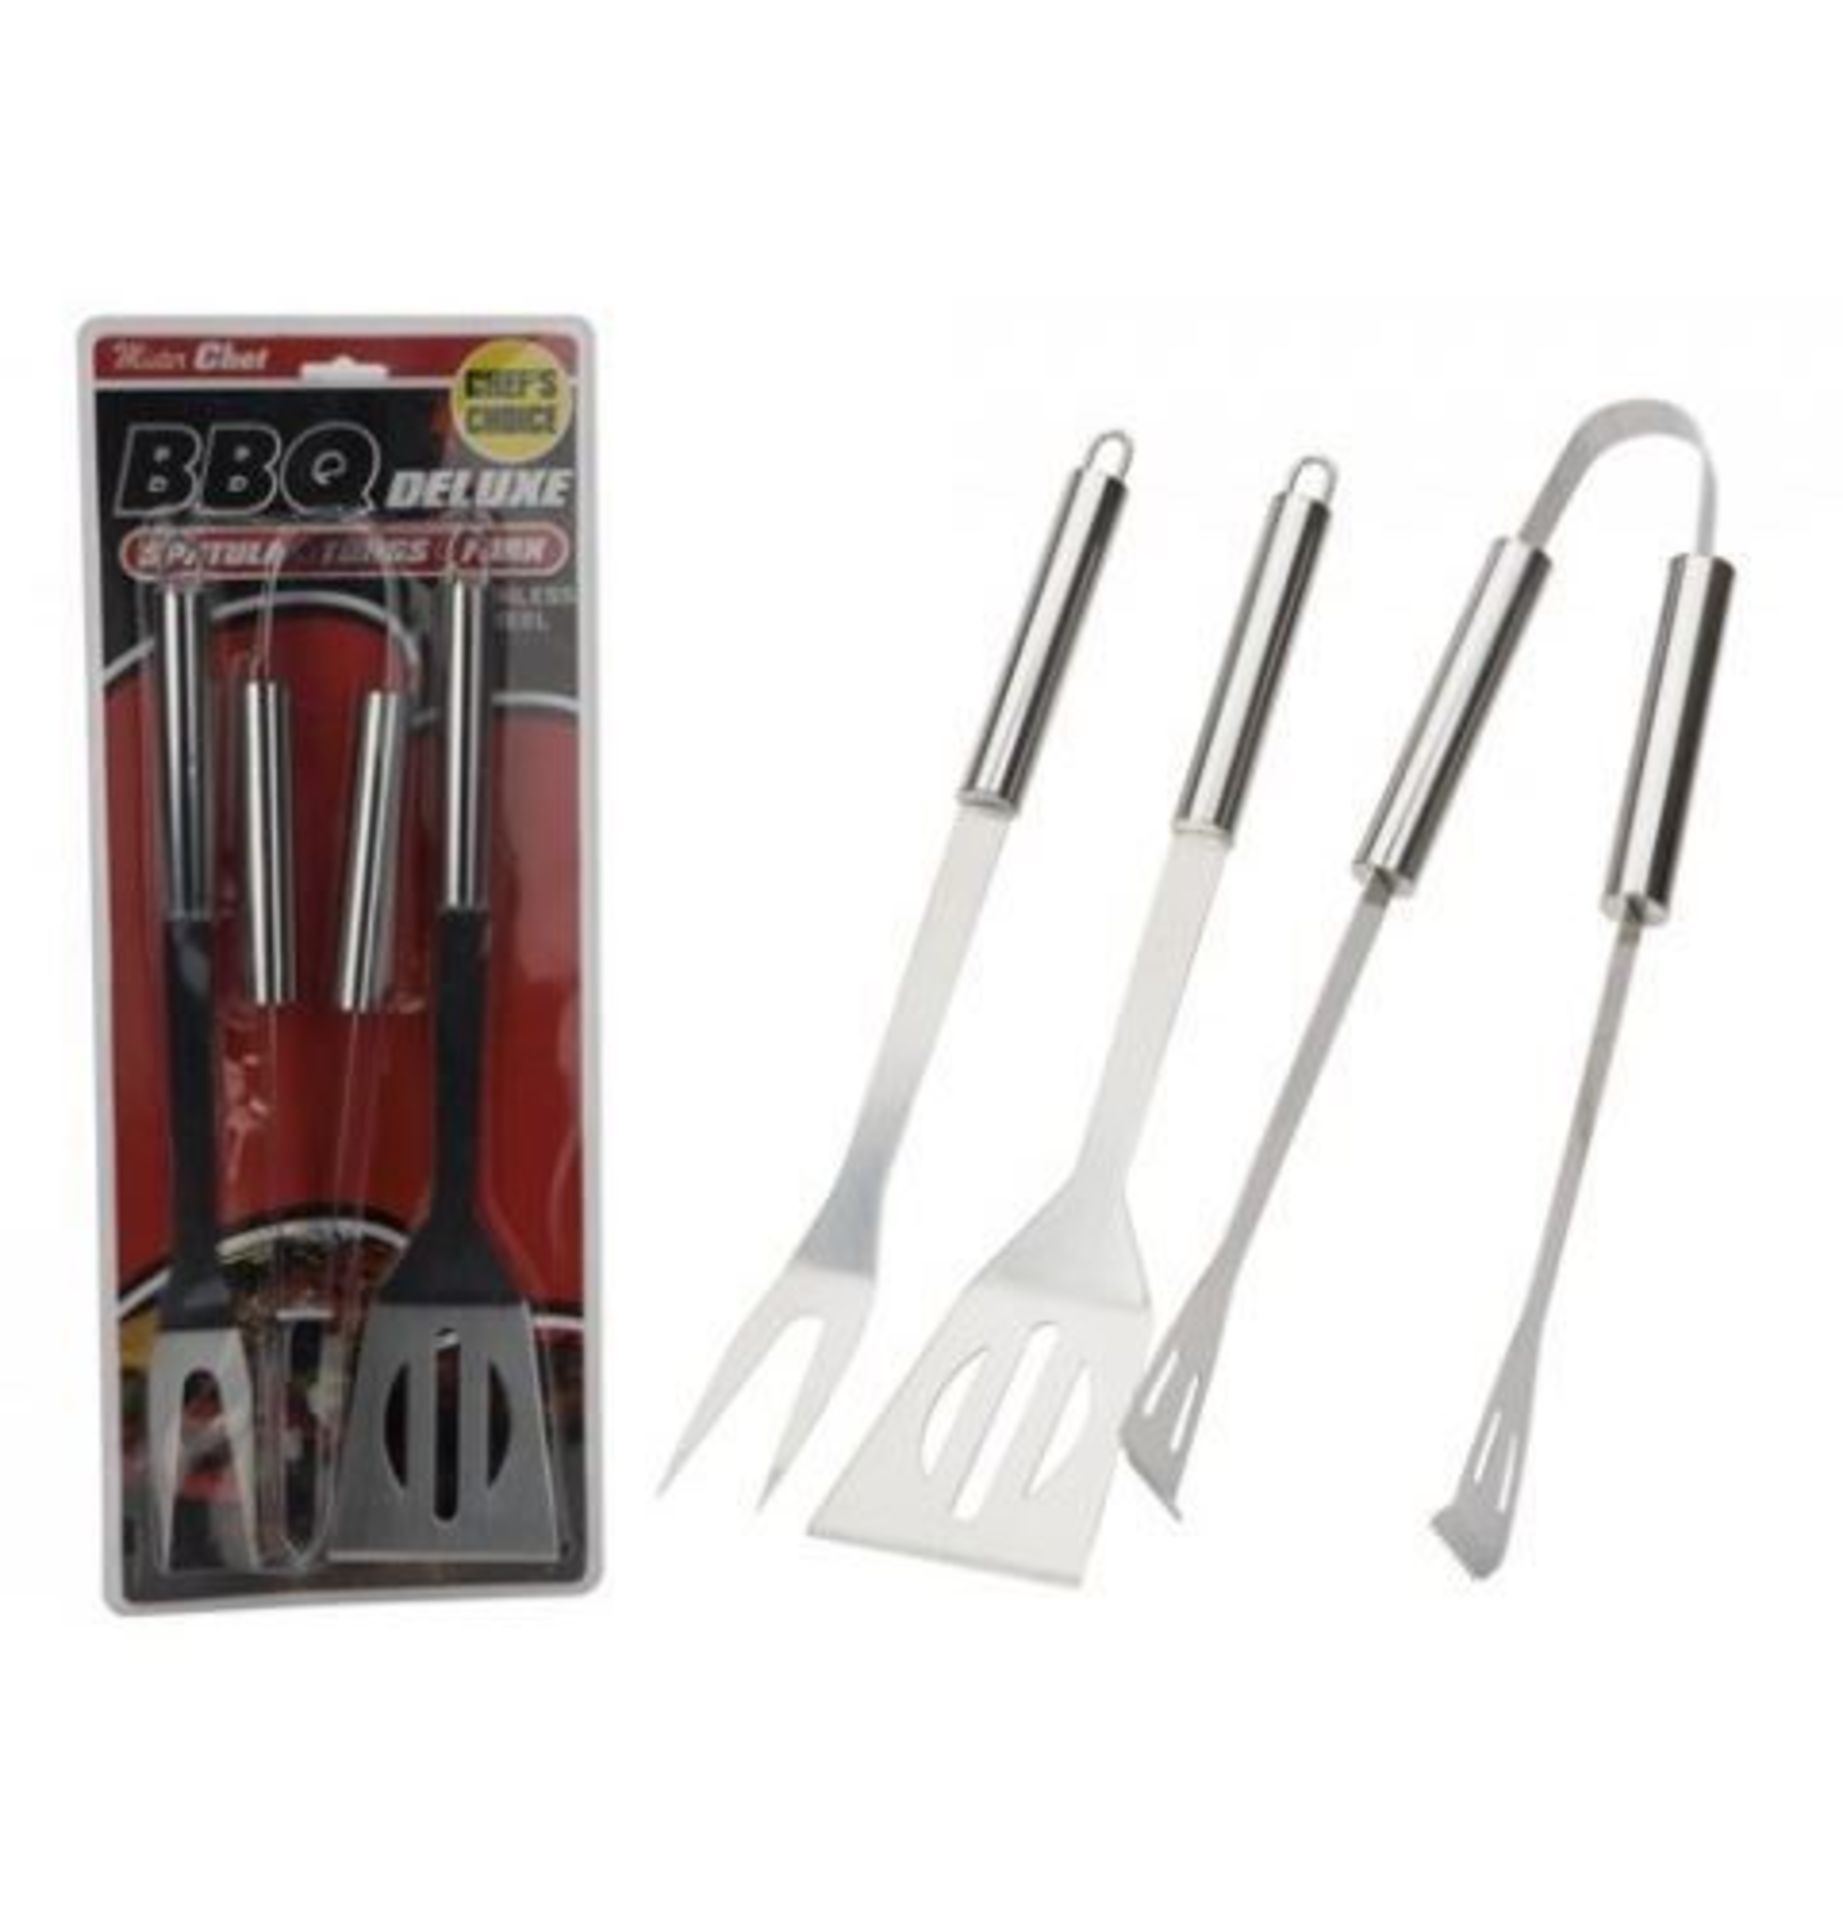 V Brand New Stainless Steel Three Piece BBQ Tool Kit X 2 YOUR BID PRICE TO BE MULTIPLIED BY TWO